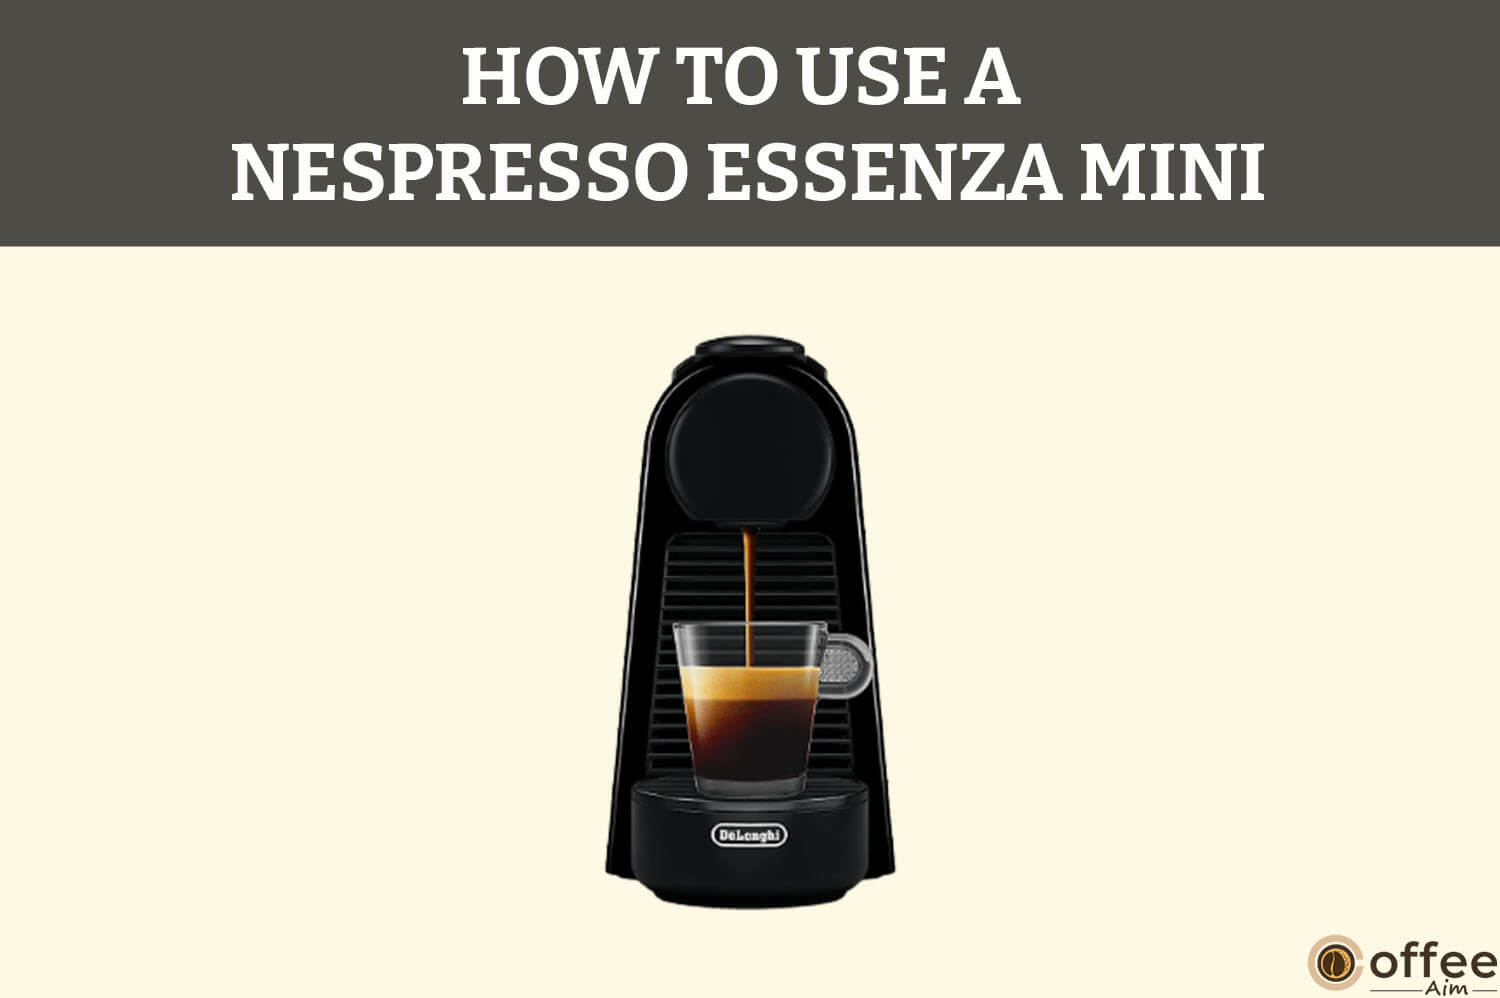 Featured image for the article "How to Use A Nespresso Essenza Mini"